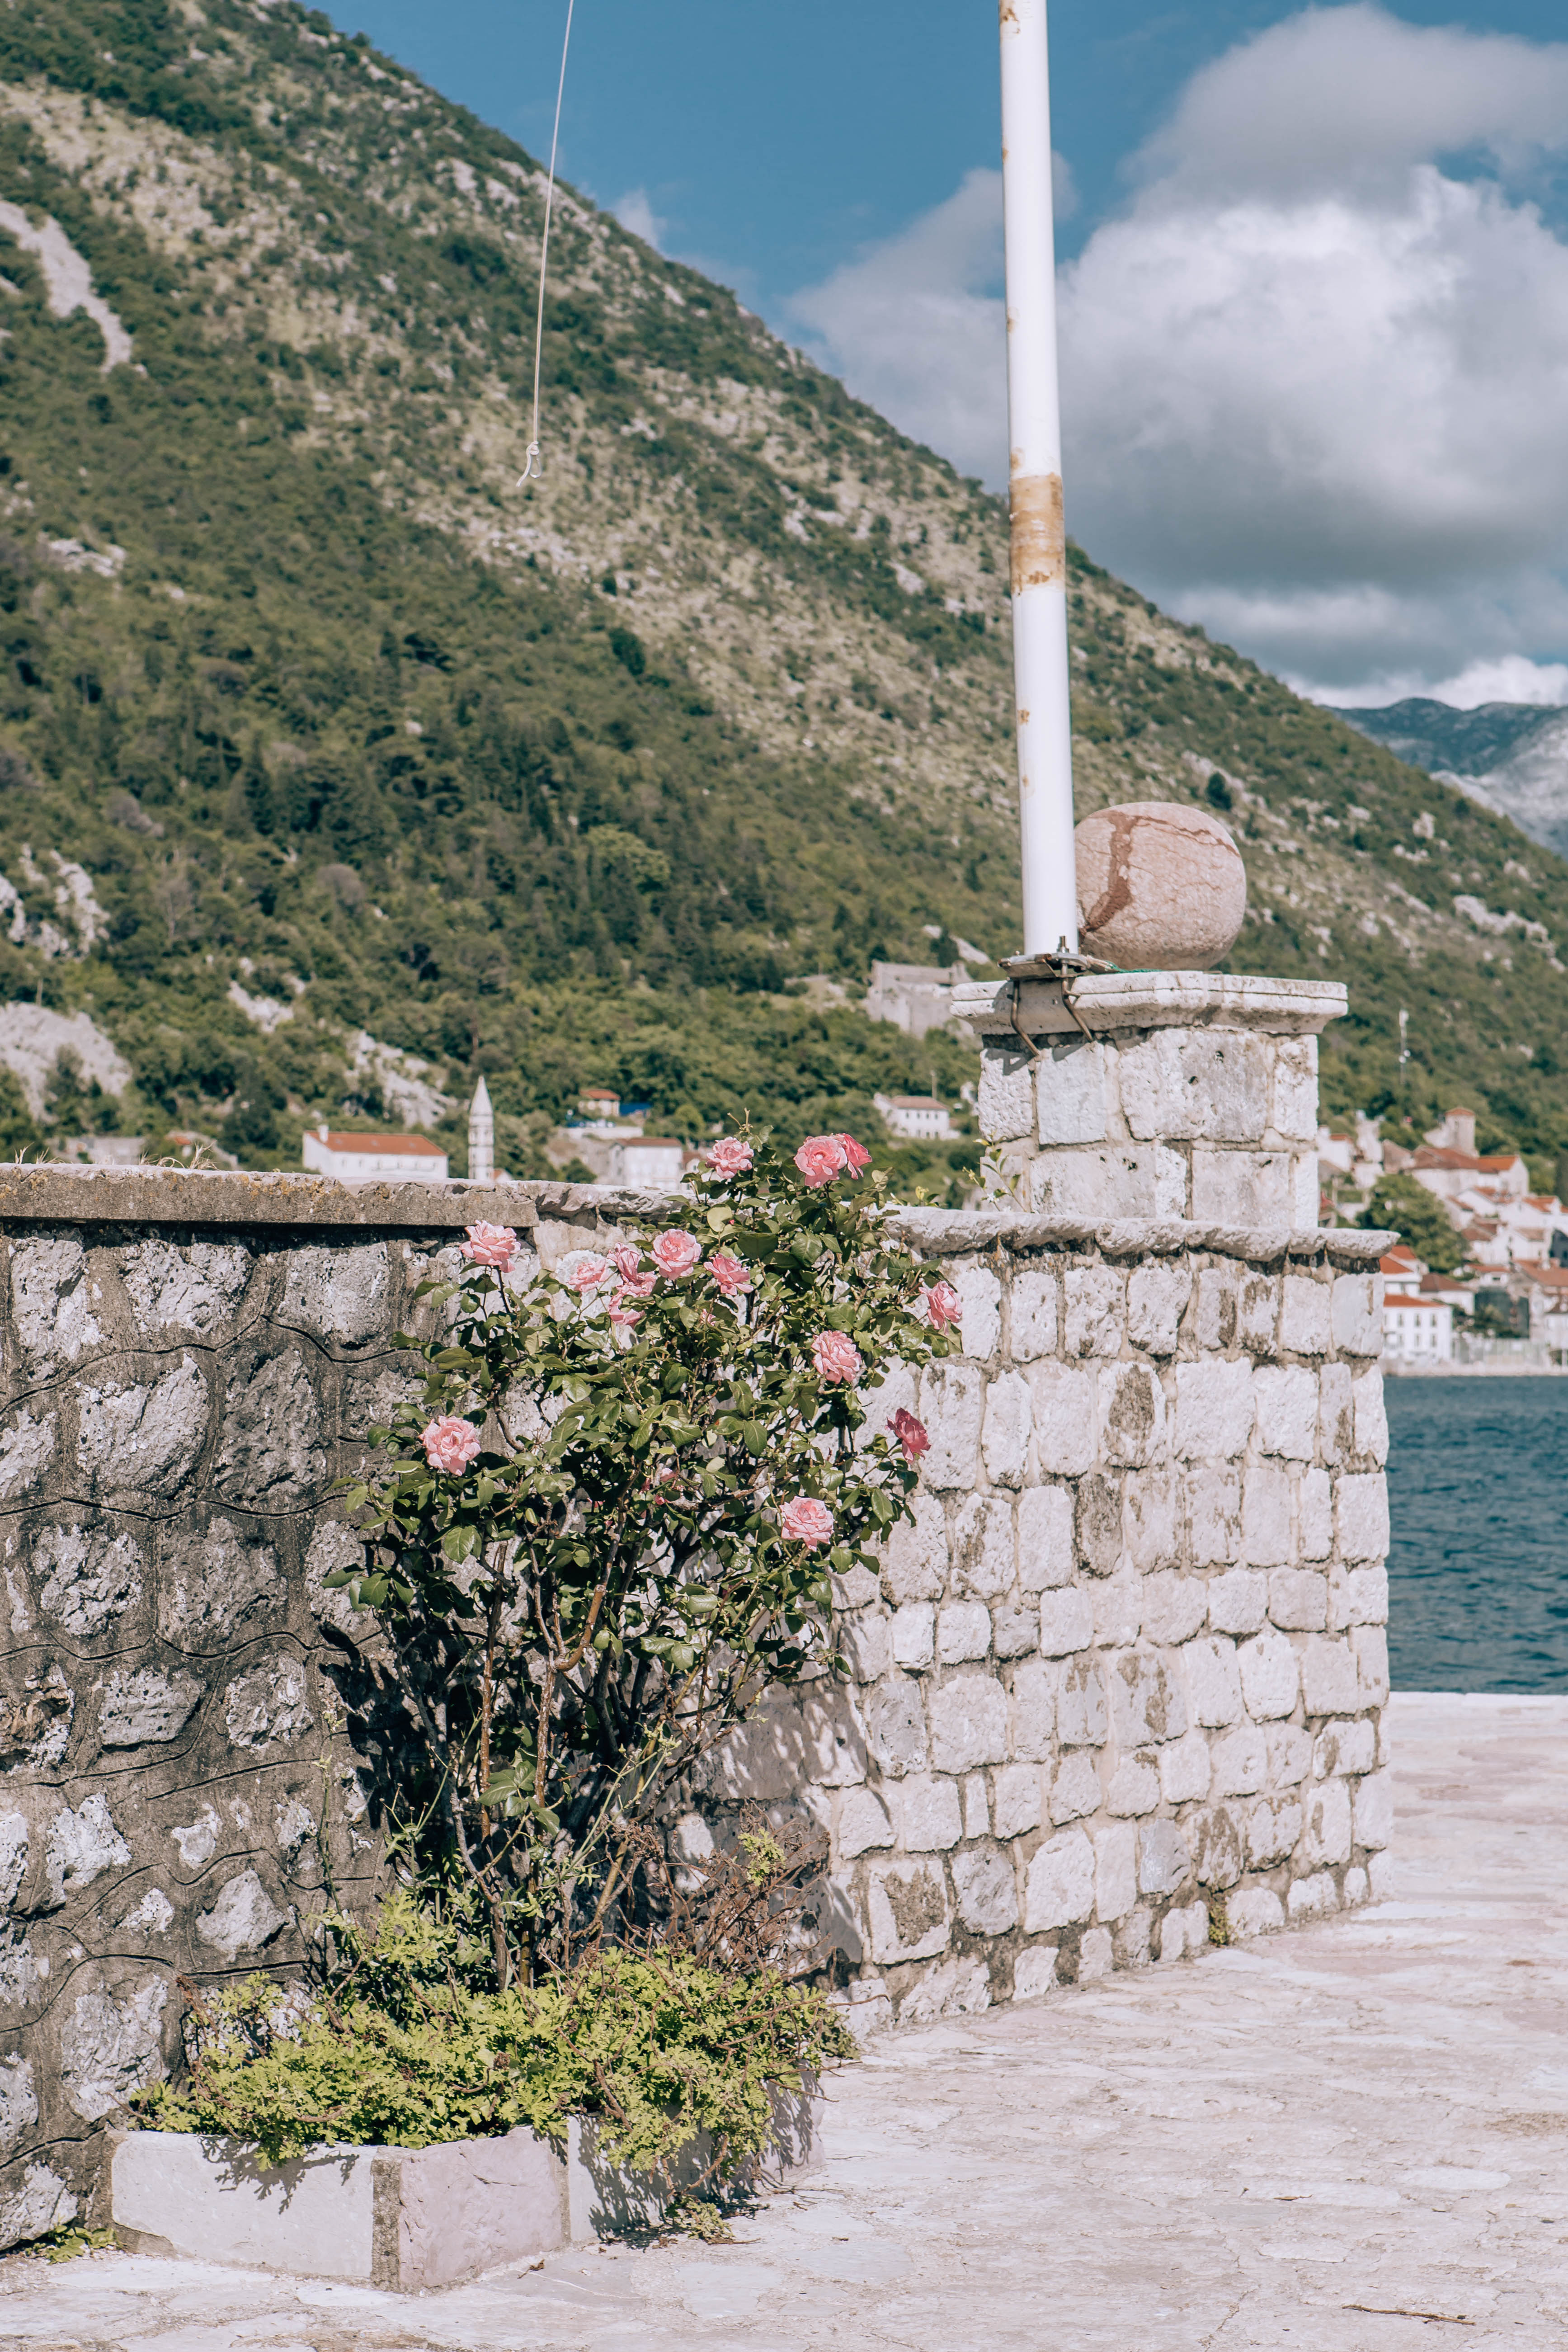 Things-to-do-in-Montenegro-46-of-60 Why you need to add montenegro to your travel list part 2